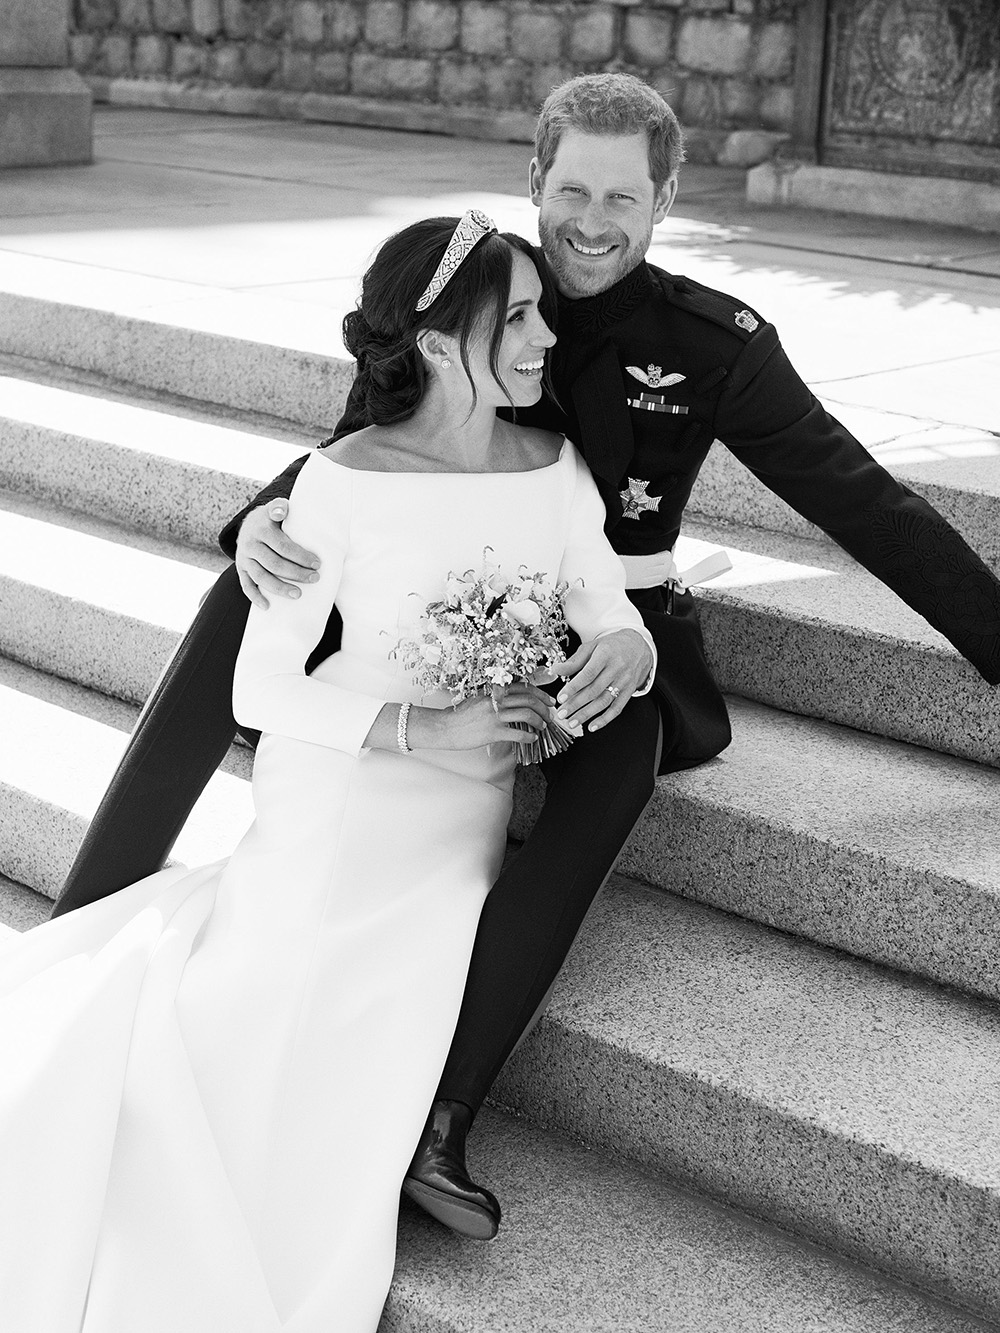 Free for Editorial Use Only. See terms of release, which must be included and passed-on to anyone to whom this image is suppliedMandatory Credit: Photo by REX/Shutterstock (9687843c)This official wedding photograph released by the Duke and Meghan Duchess of Sussex, Meghan Duchess of Sussex and Prince Harry, shows - the Duke and Duchess pictured together on the East Terrace of Windsor Castle.The wedding of Prince Harry and Meghan Markle, Official Portraits, Windsor, Berkshire, UK - 19 May 2018News Editorial Use Only. No Commercial Use. No Merchandising, Advertising, Souvenirs, Memorabilia Or Colourably Similar. Not for Use After 31 December 2018 Without Prior Permission From Kensington Palace. No Cropping. Copyright in the photograph is vested in The Duke and Duchess of Sussex. Publications are asked to credit the photograph to Alexi Lubomirski. No charge should be made for the supply, release or publication of the photograph. The photograph must not be digitally enhanced, manipulated or modified in any manner or form and must include all of the individuals in the photograph when published.